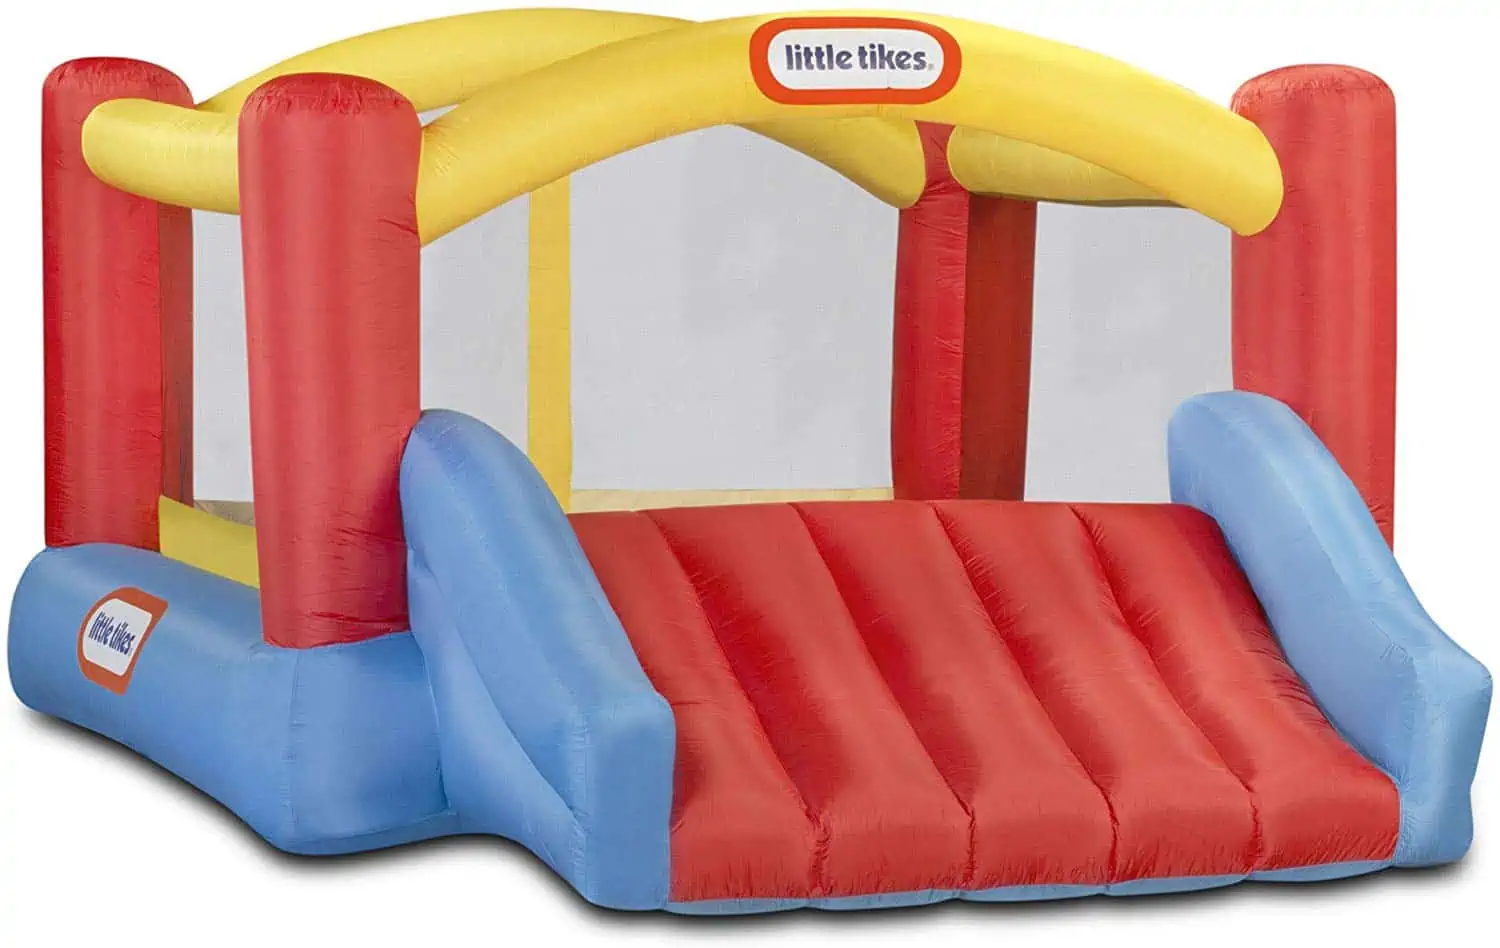 Little Tikes bouncy house and play area.